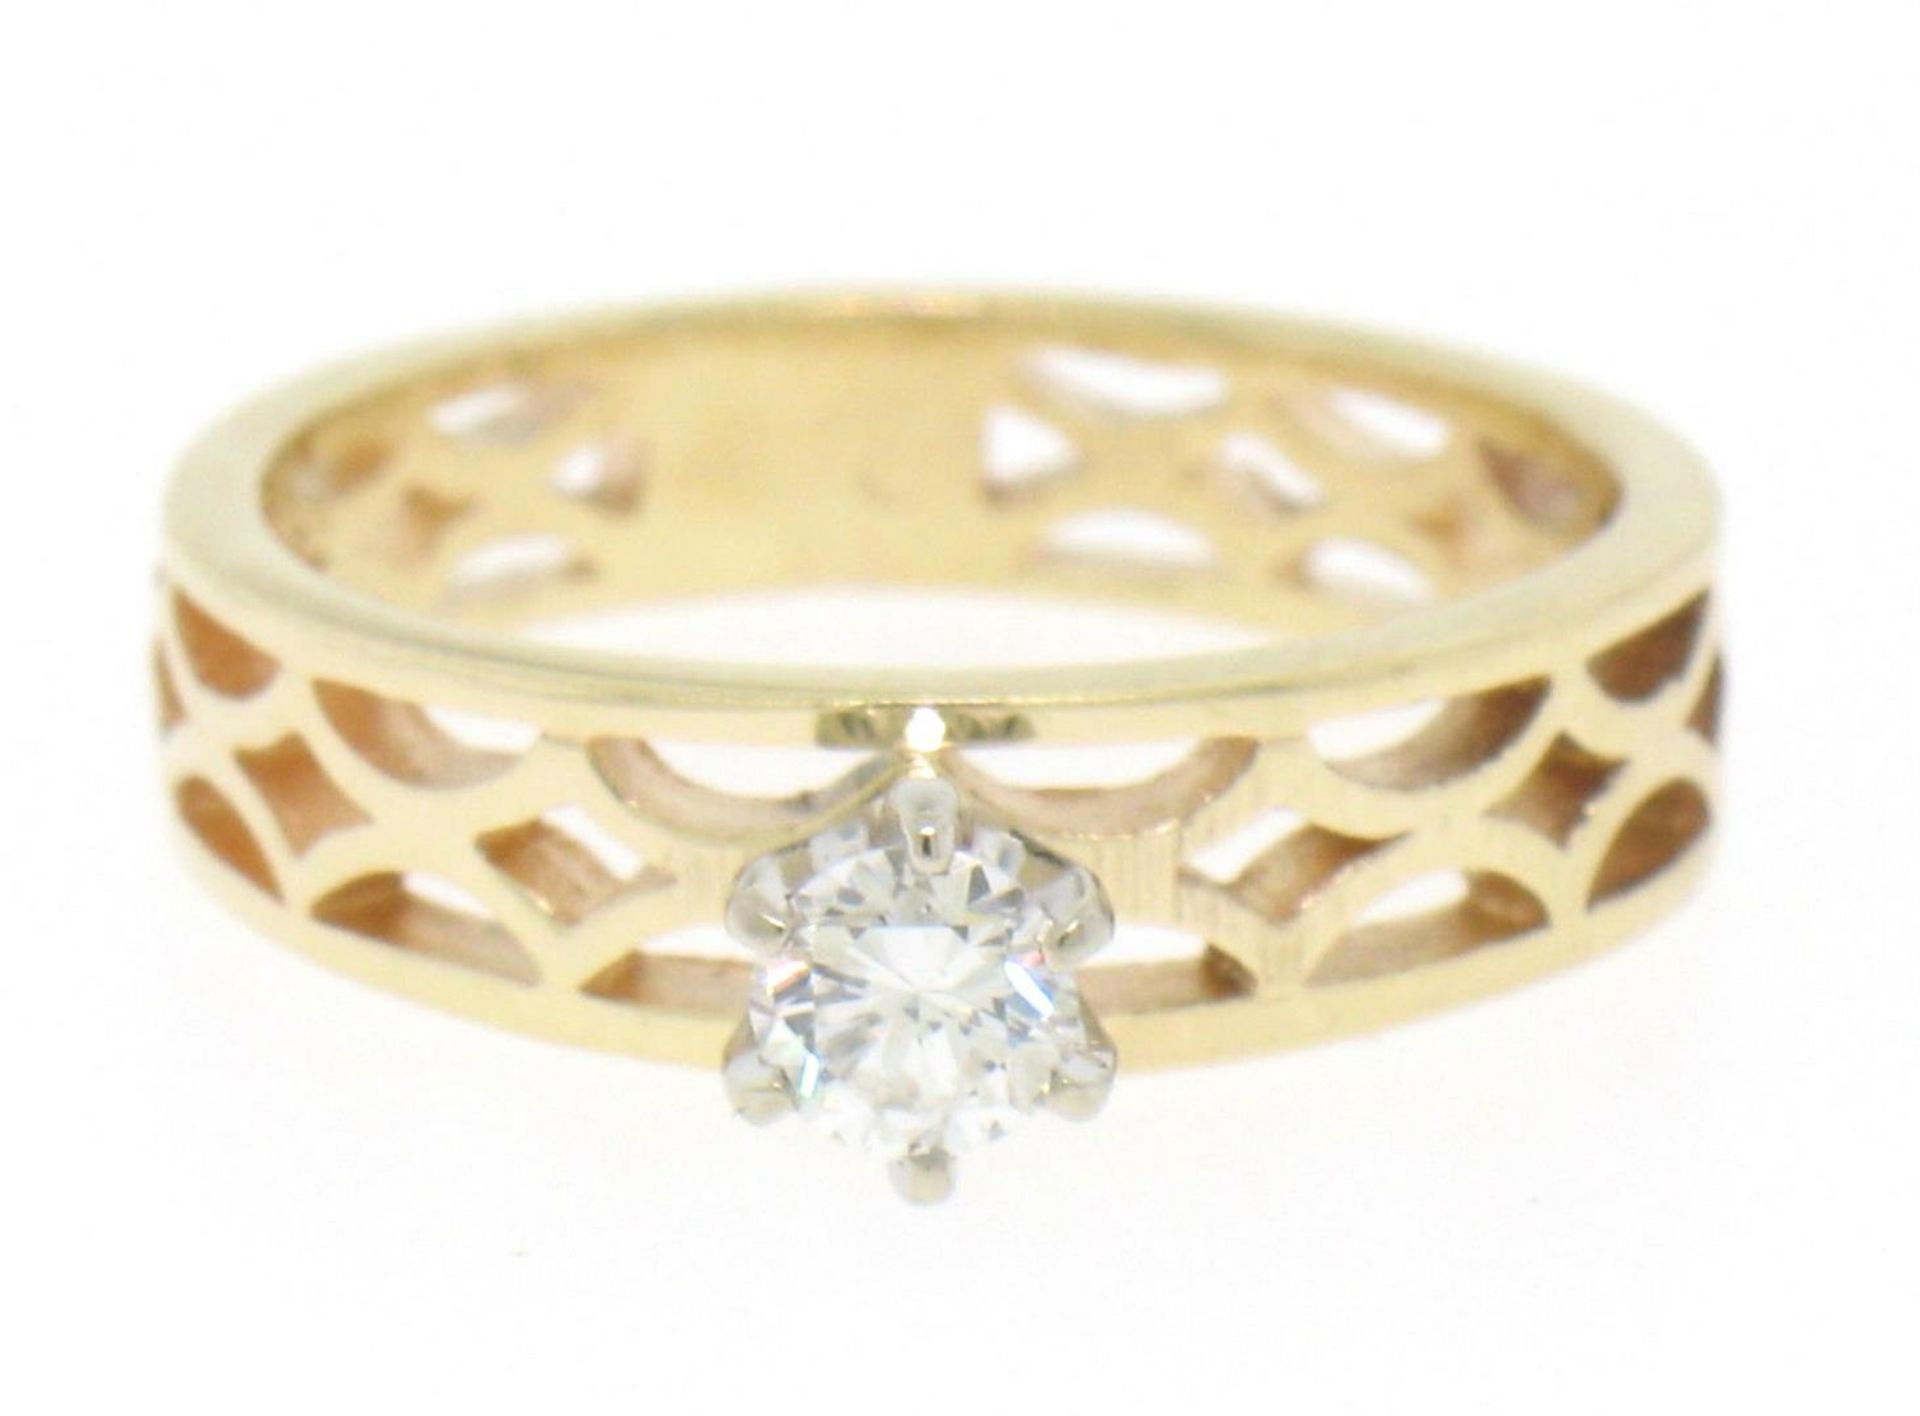 Estate 14k Solid Yellow Gold Solitaire Diamond Ring with Pierced Open Work Look - Image 3 of 5